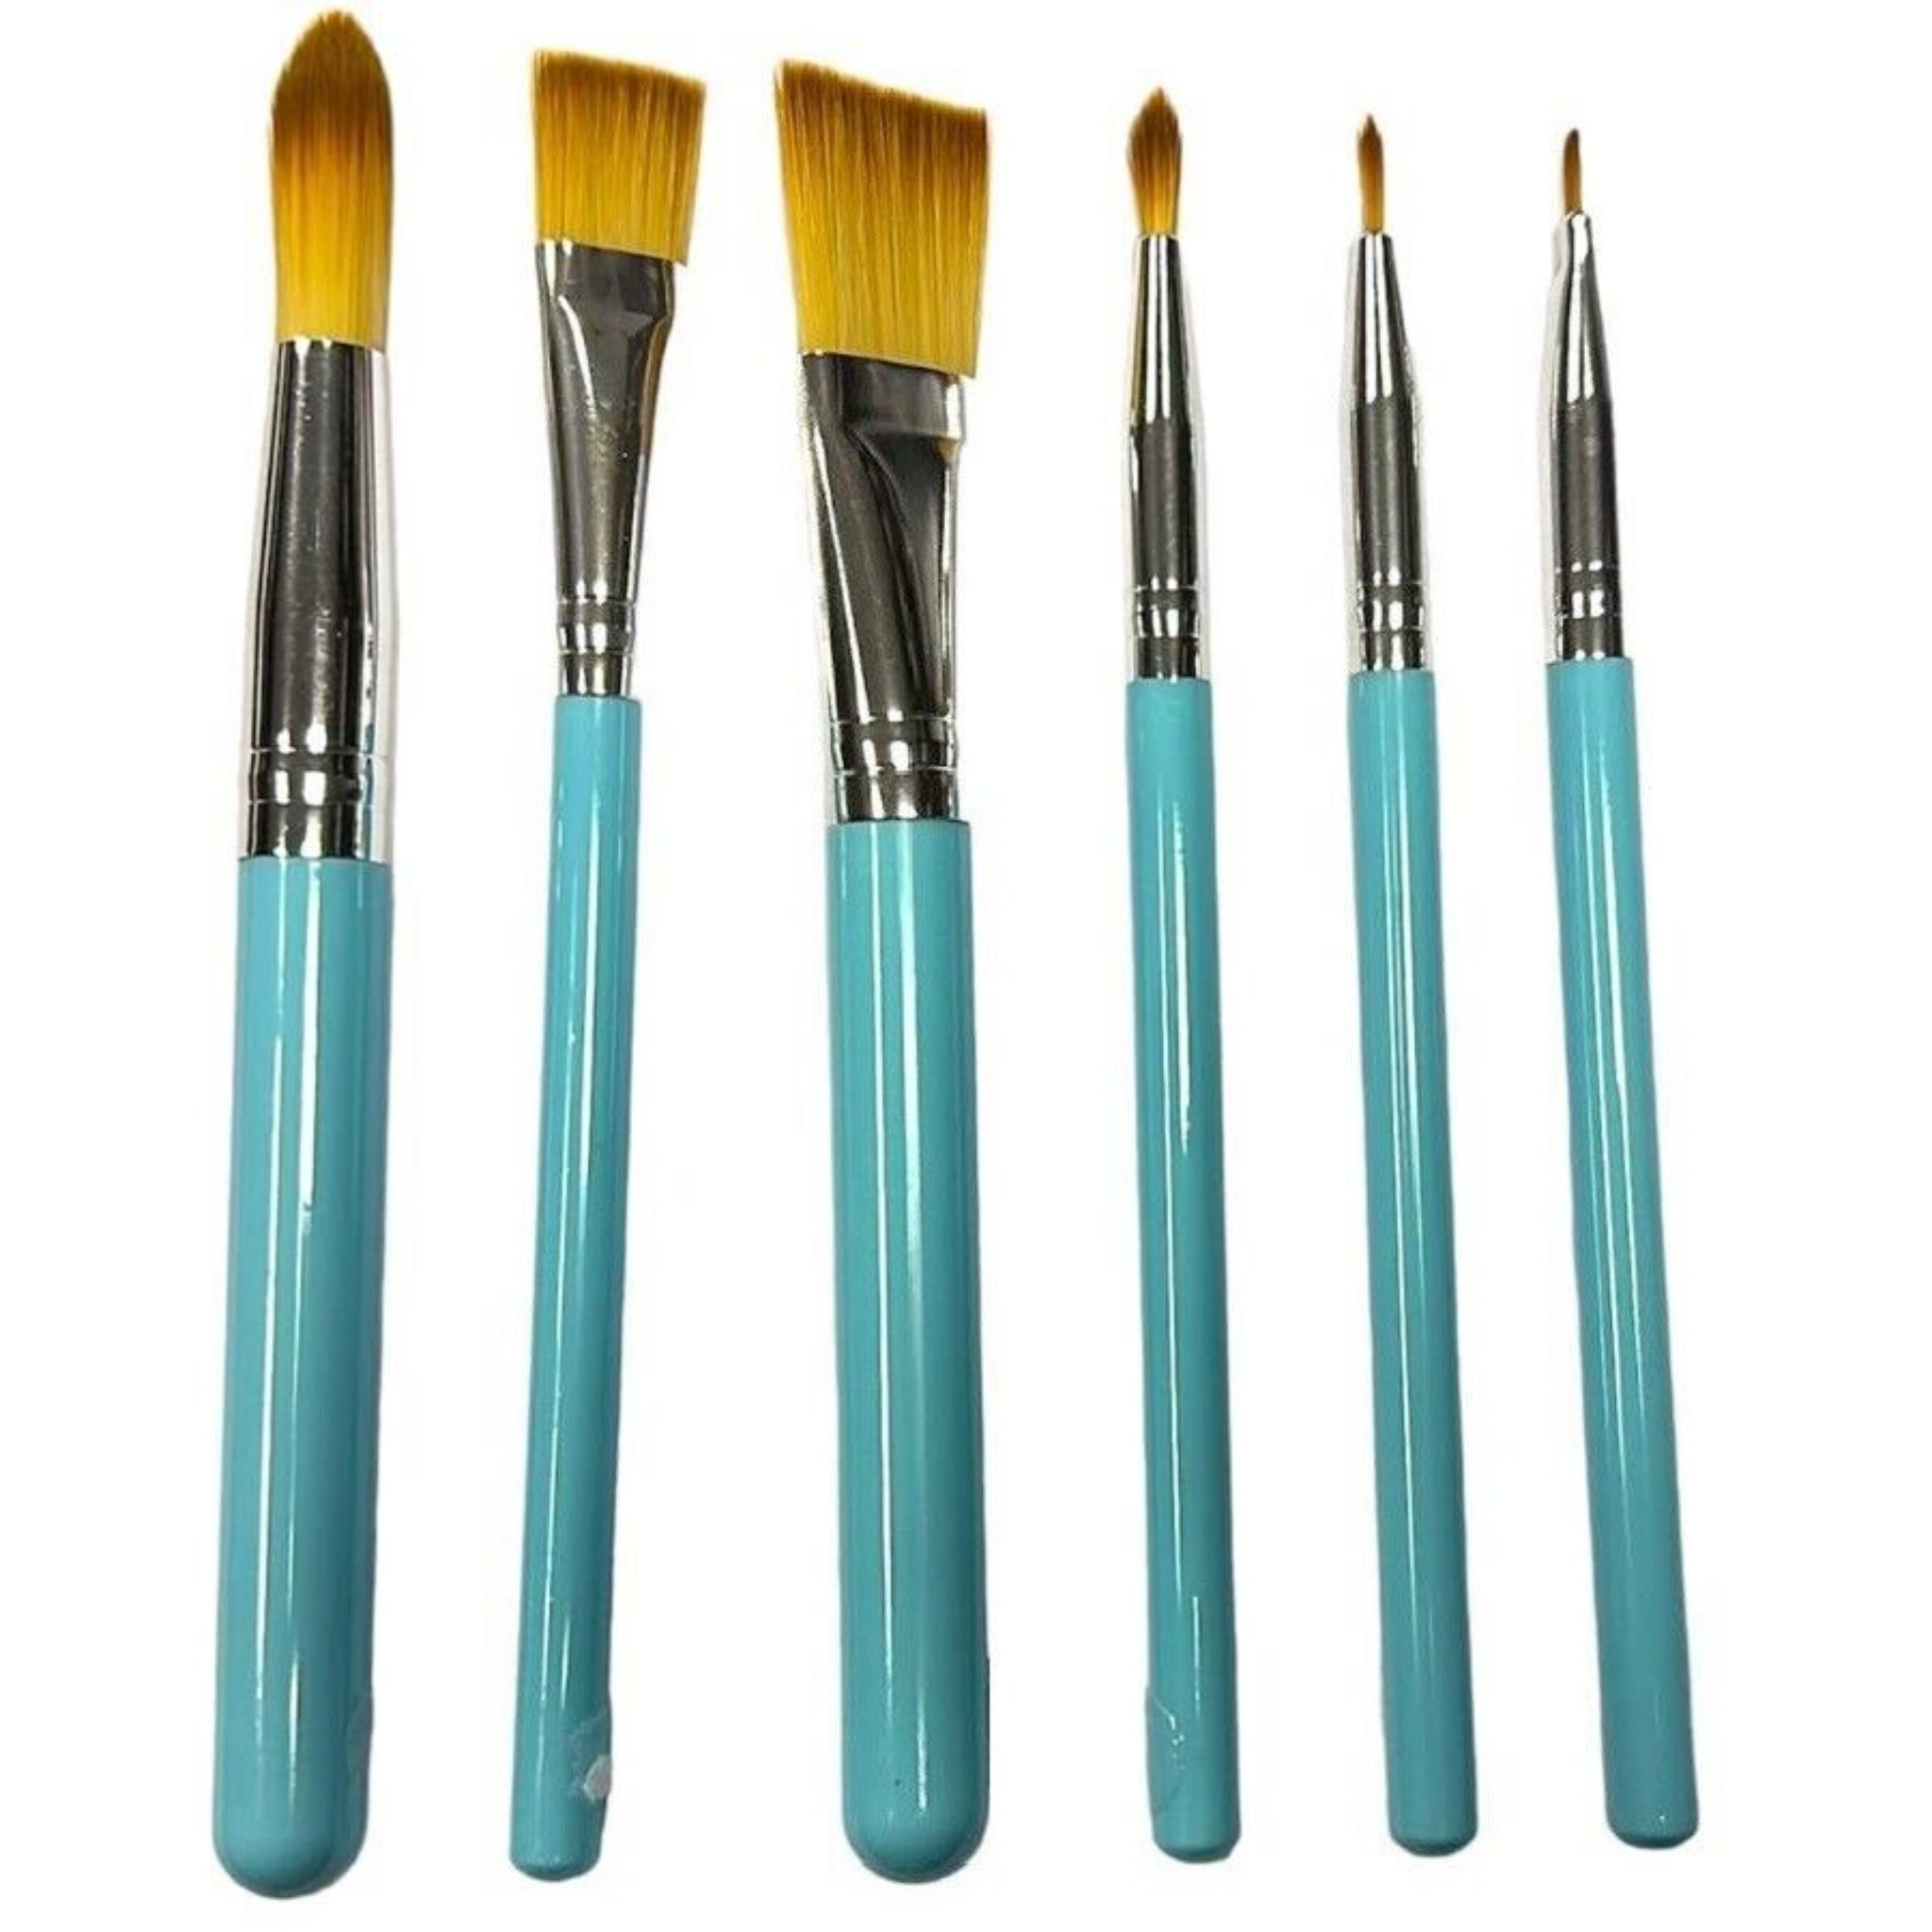 Beclen Harp 6pc Cake Icing And Decorating Paint Brushes-Perfect Fondant Dusting Sugar Craft Clay Tool